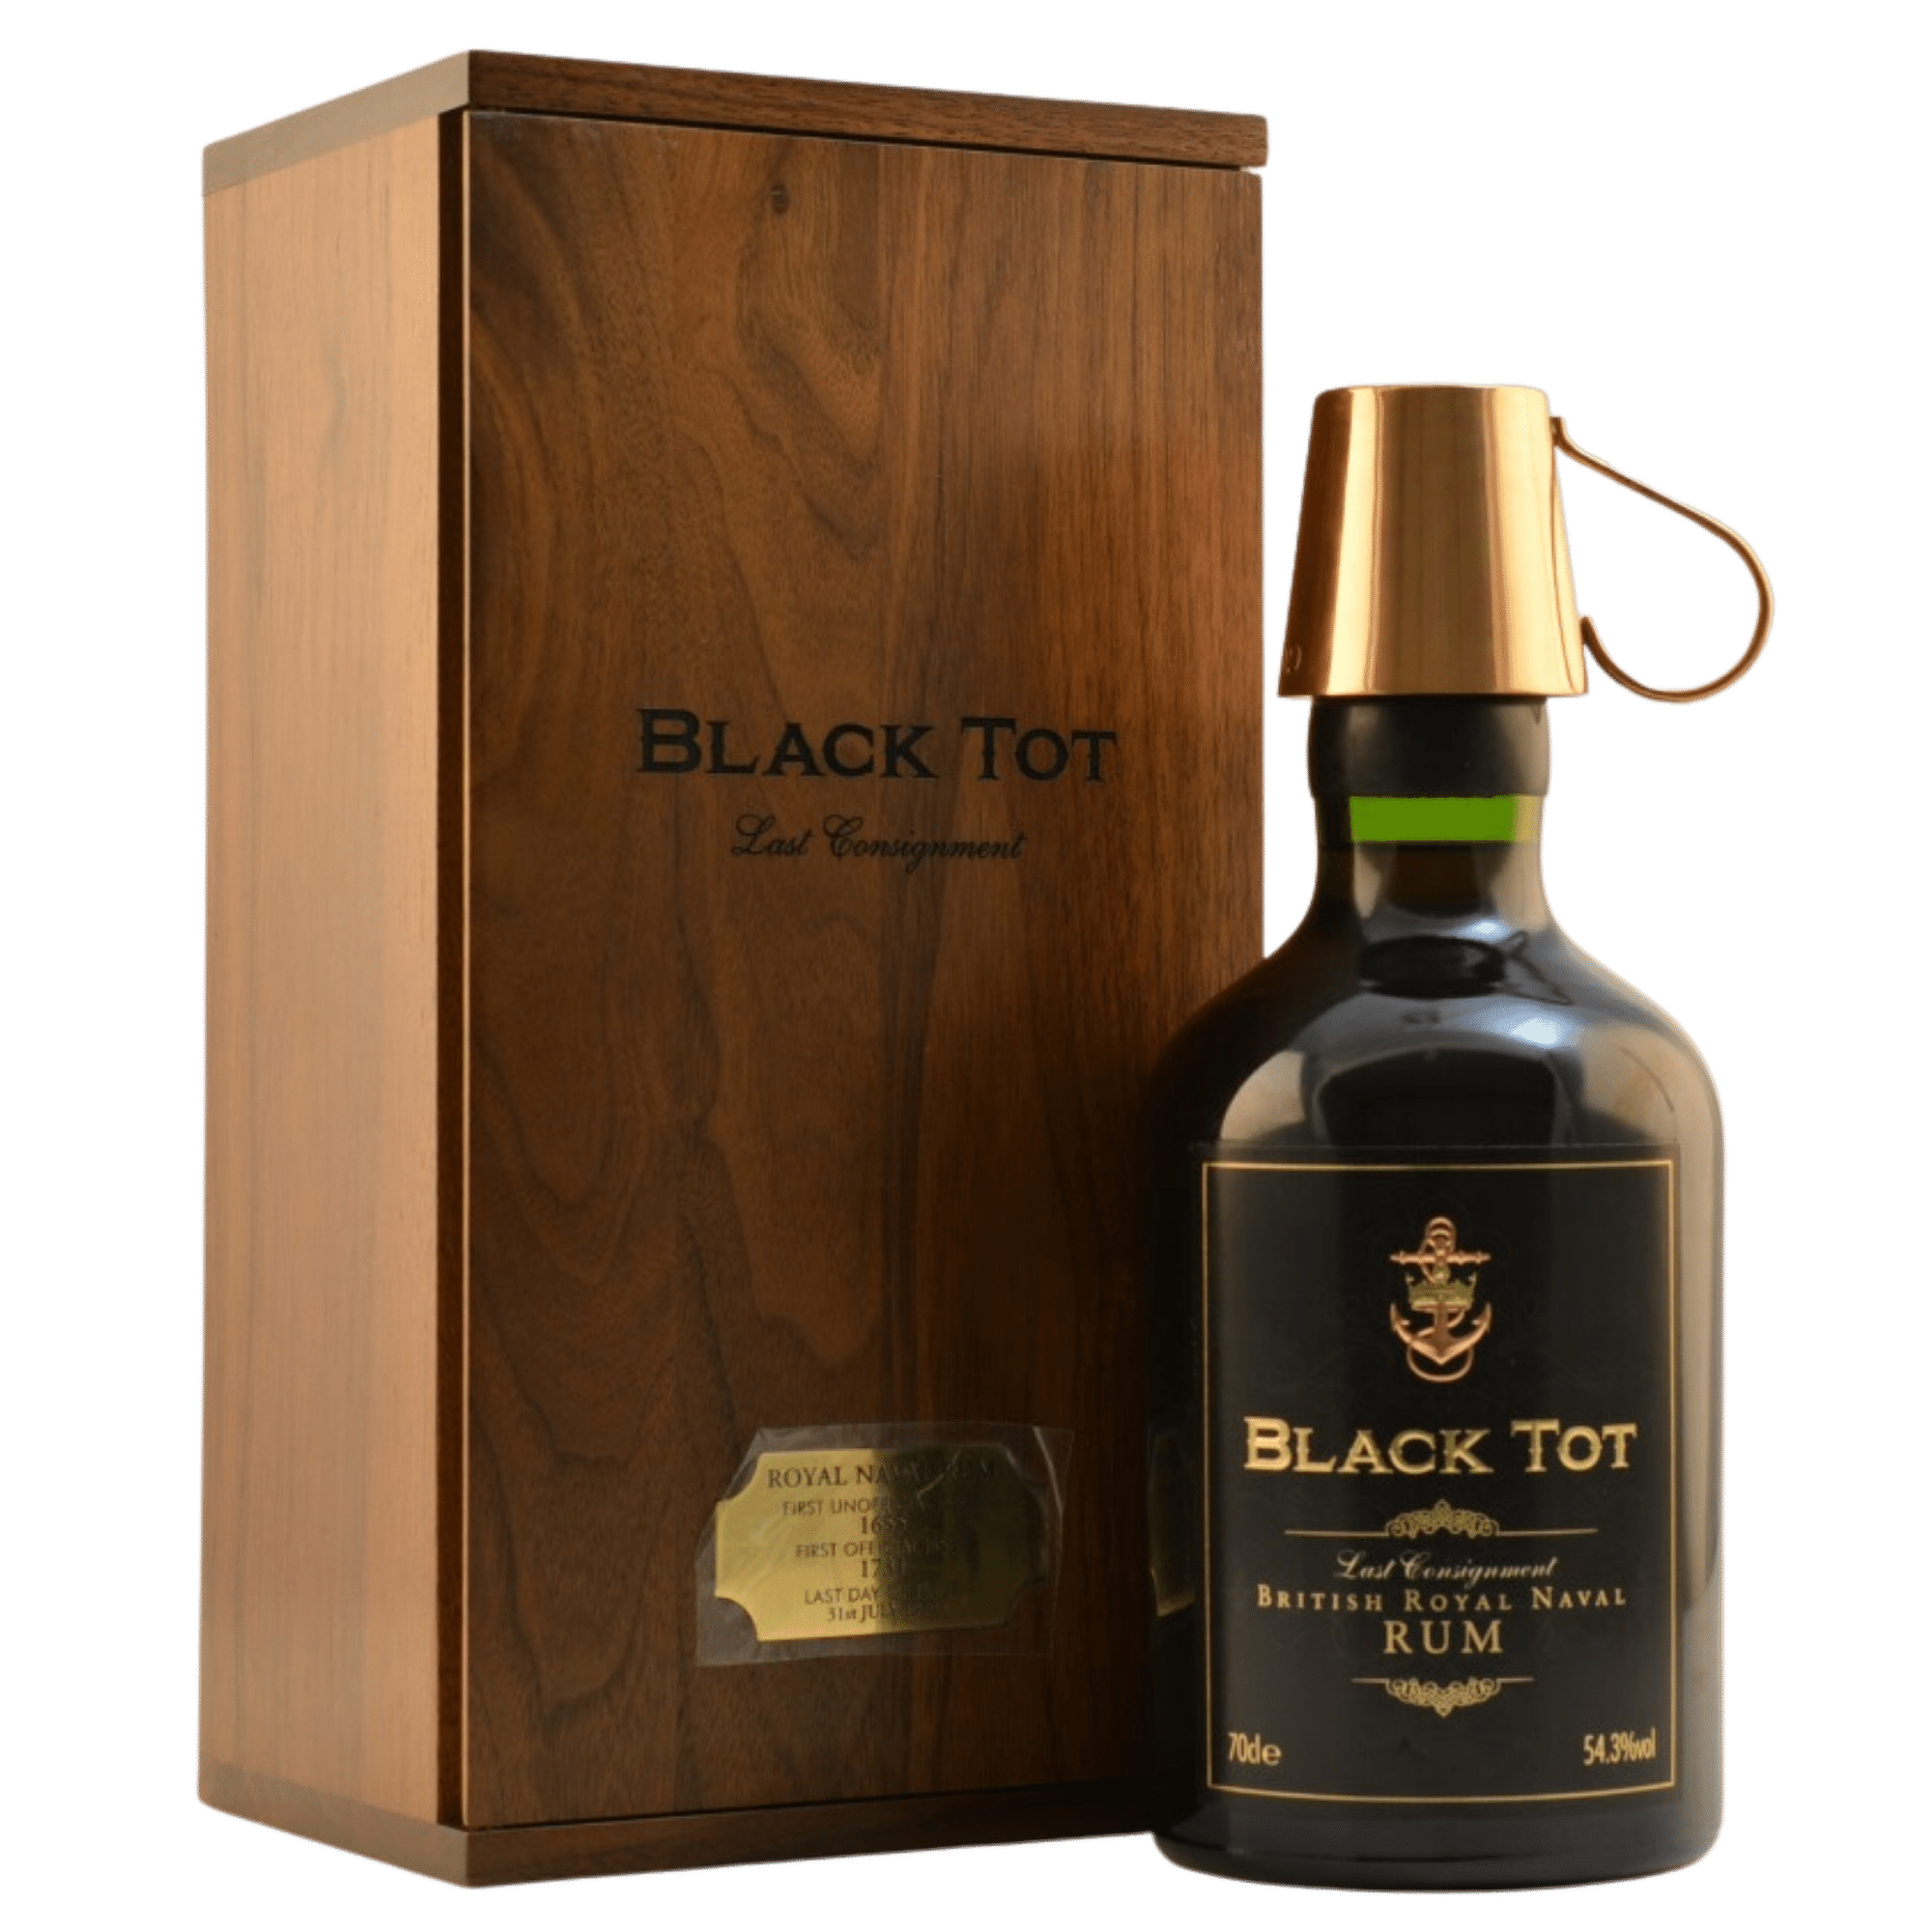 Black Tot Last Consignment British Royal Naval Rum in Holzkiste 54,3% 0,7l